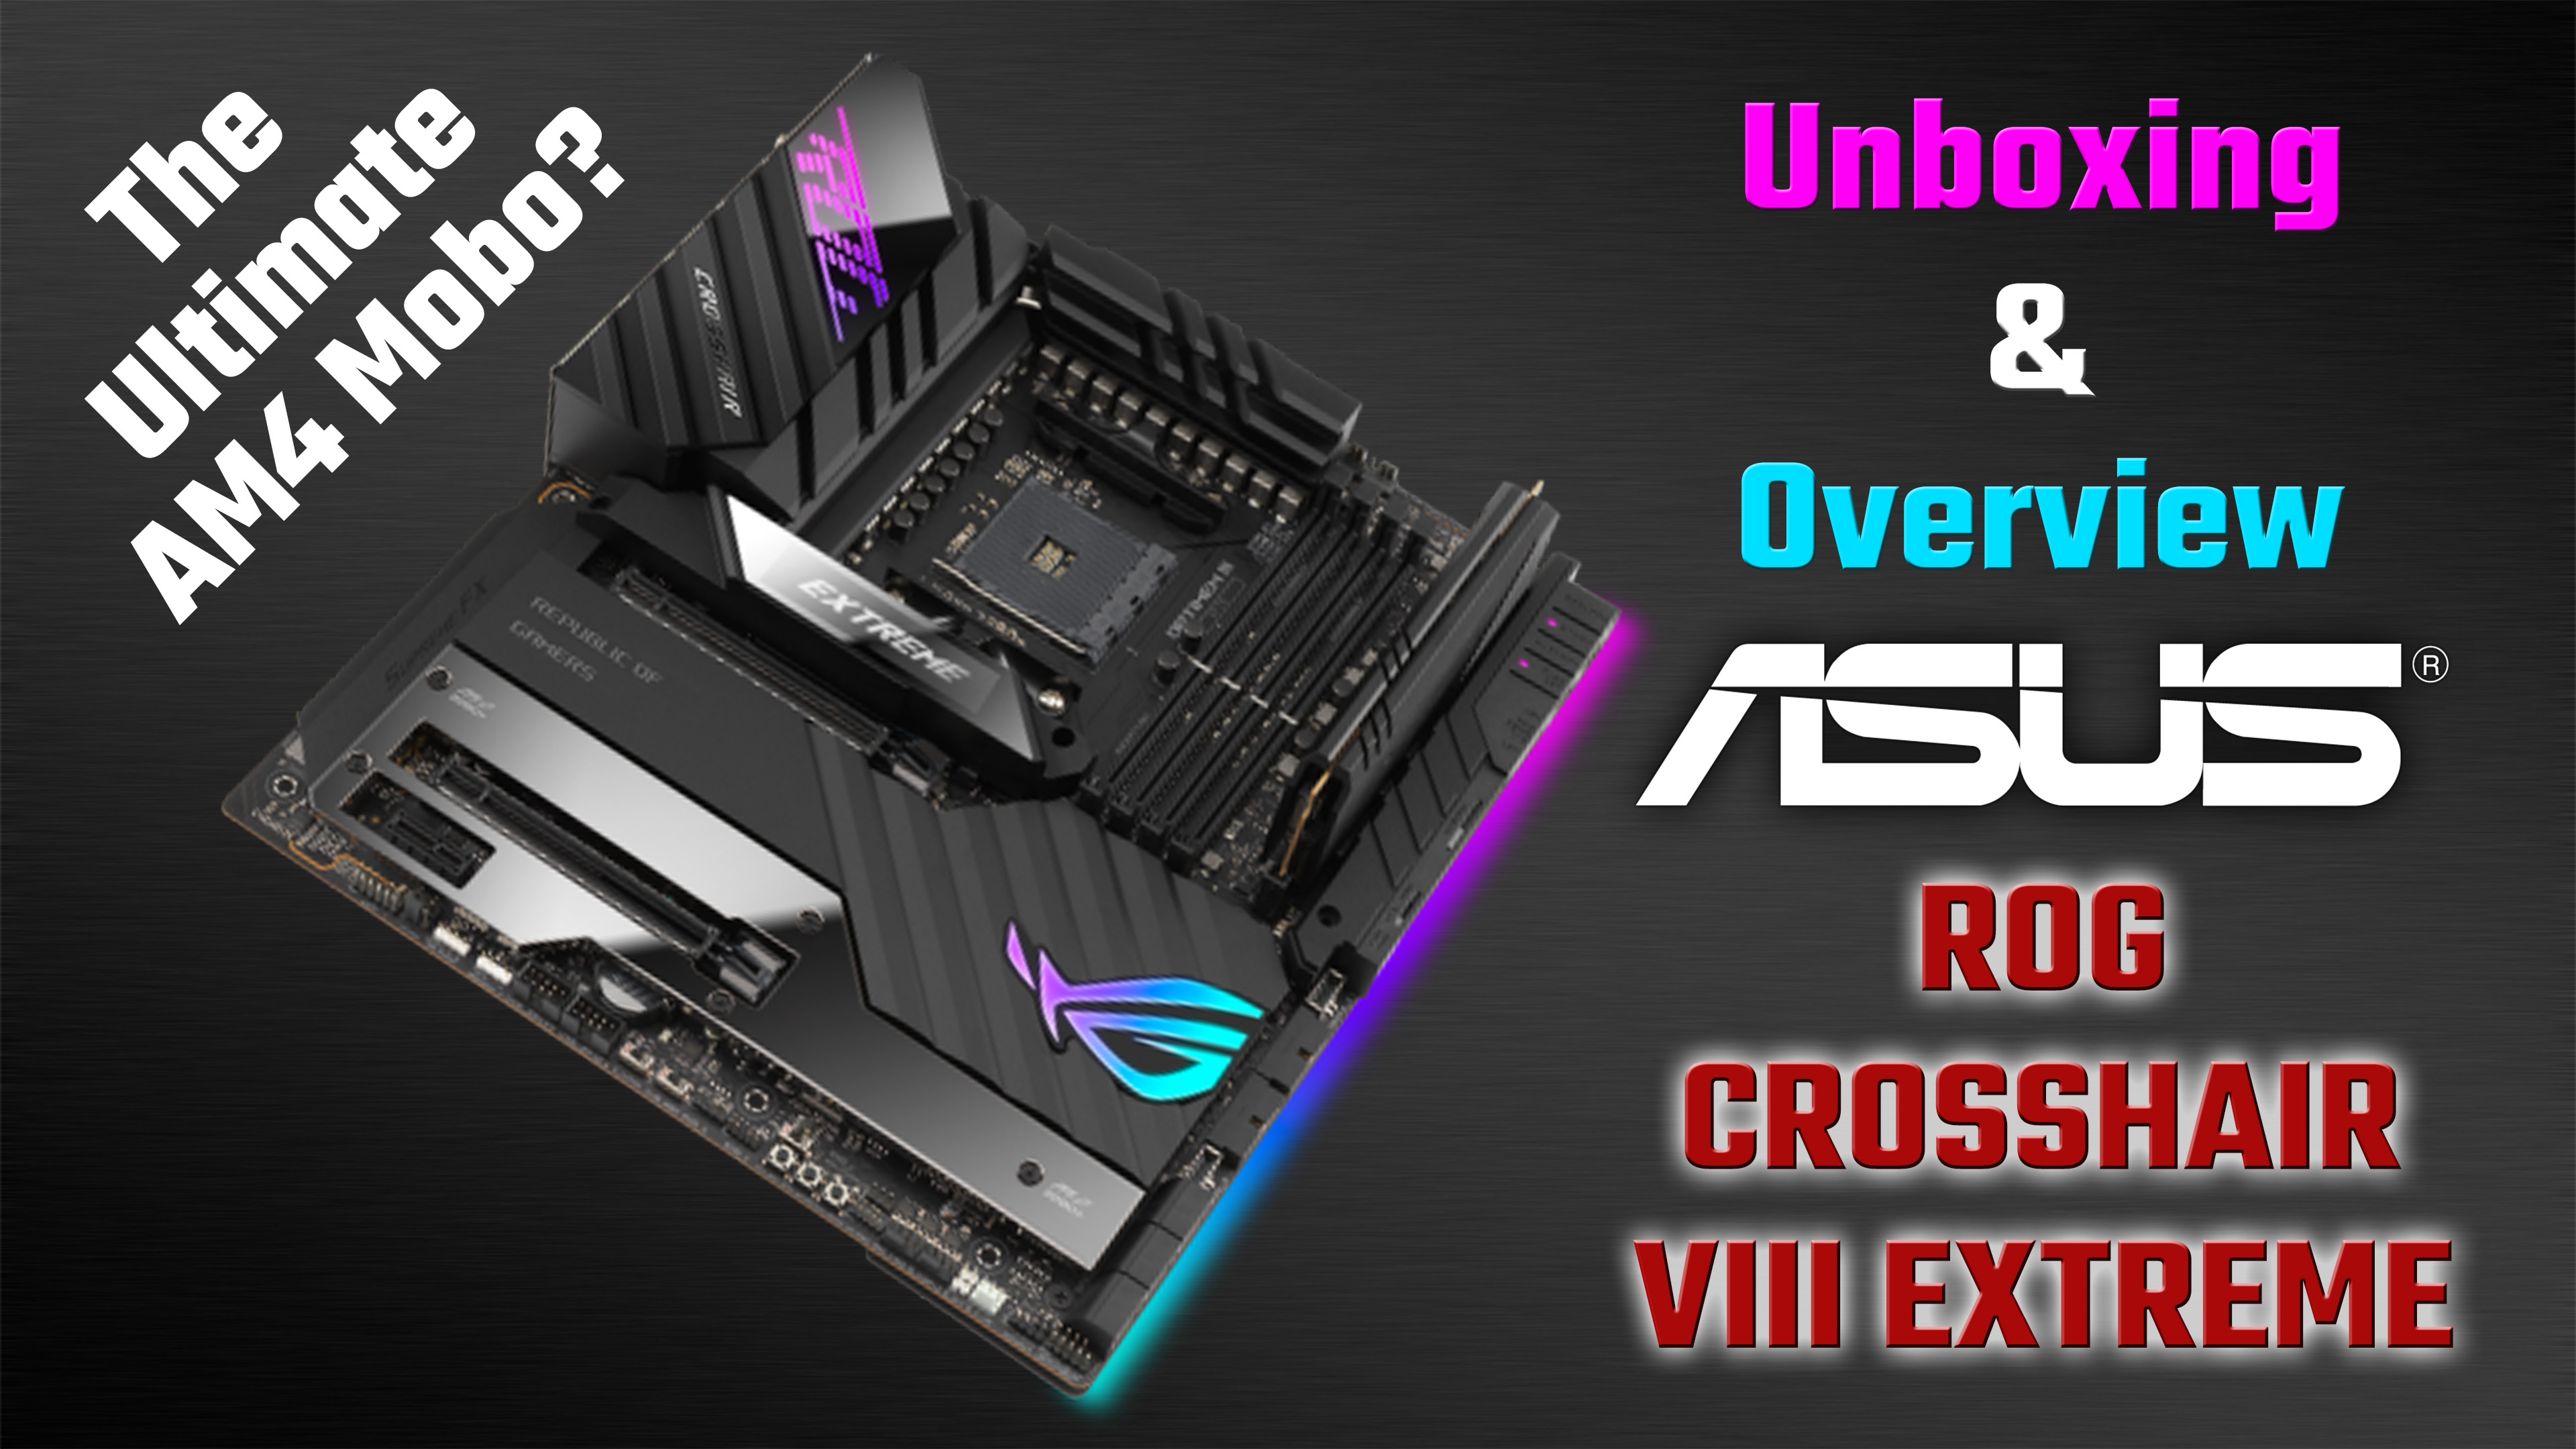 ASUS ROG Crosshair VIII Extreme Motherboard - Unboxing & Overview